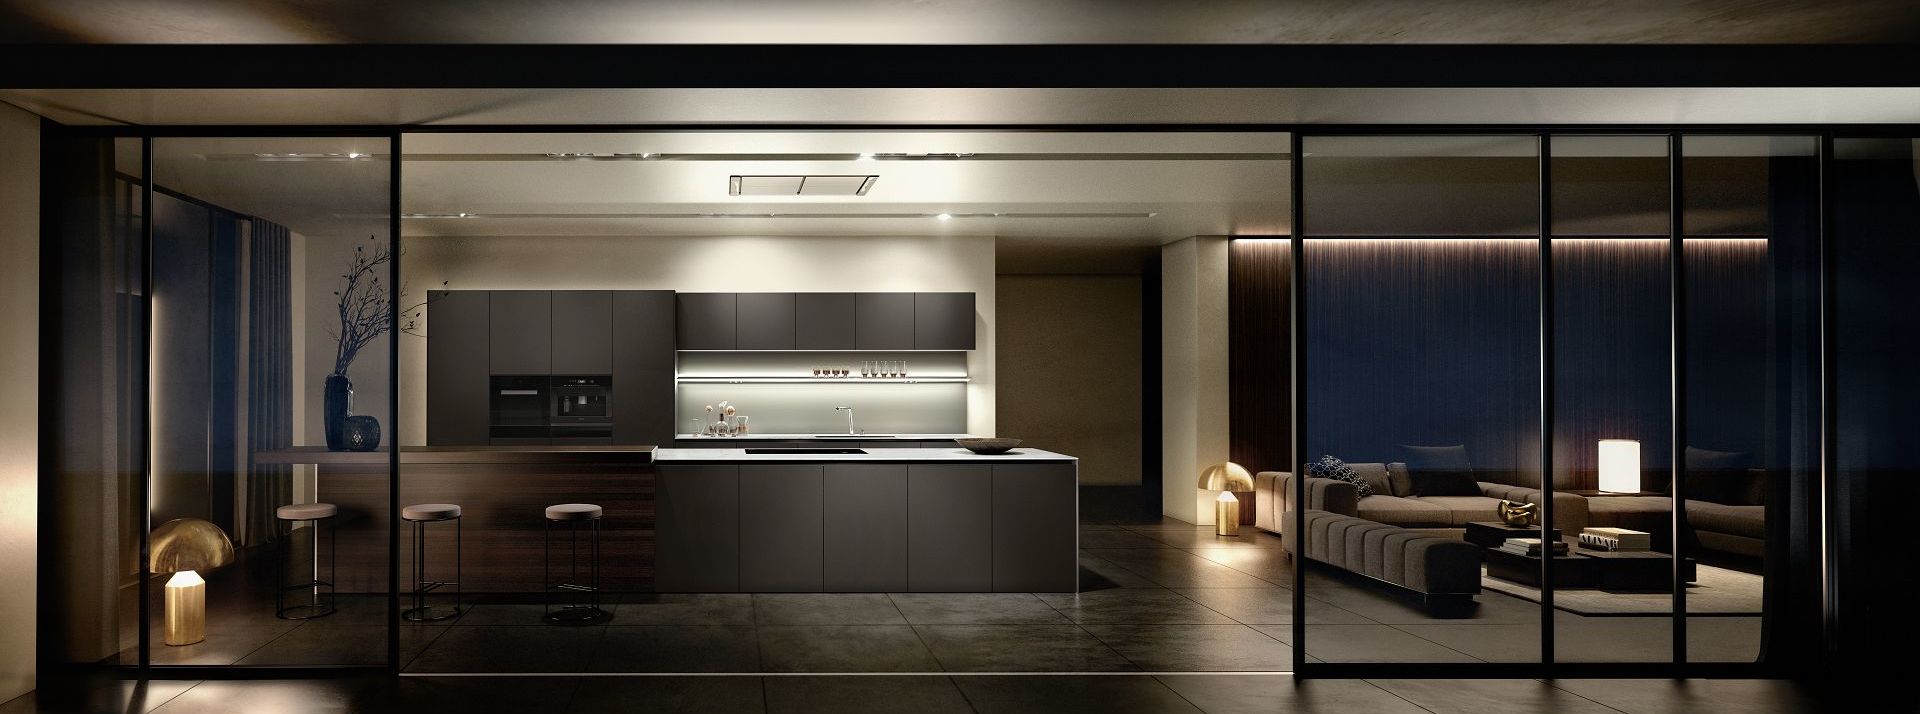 First-class SieMatic kitchen design for shapes, proportions and materials of timeless quality